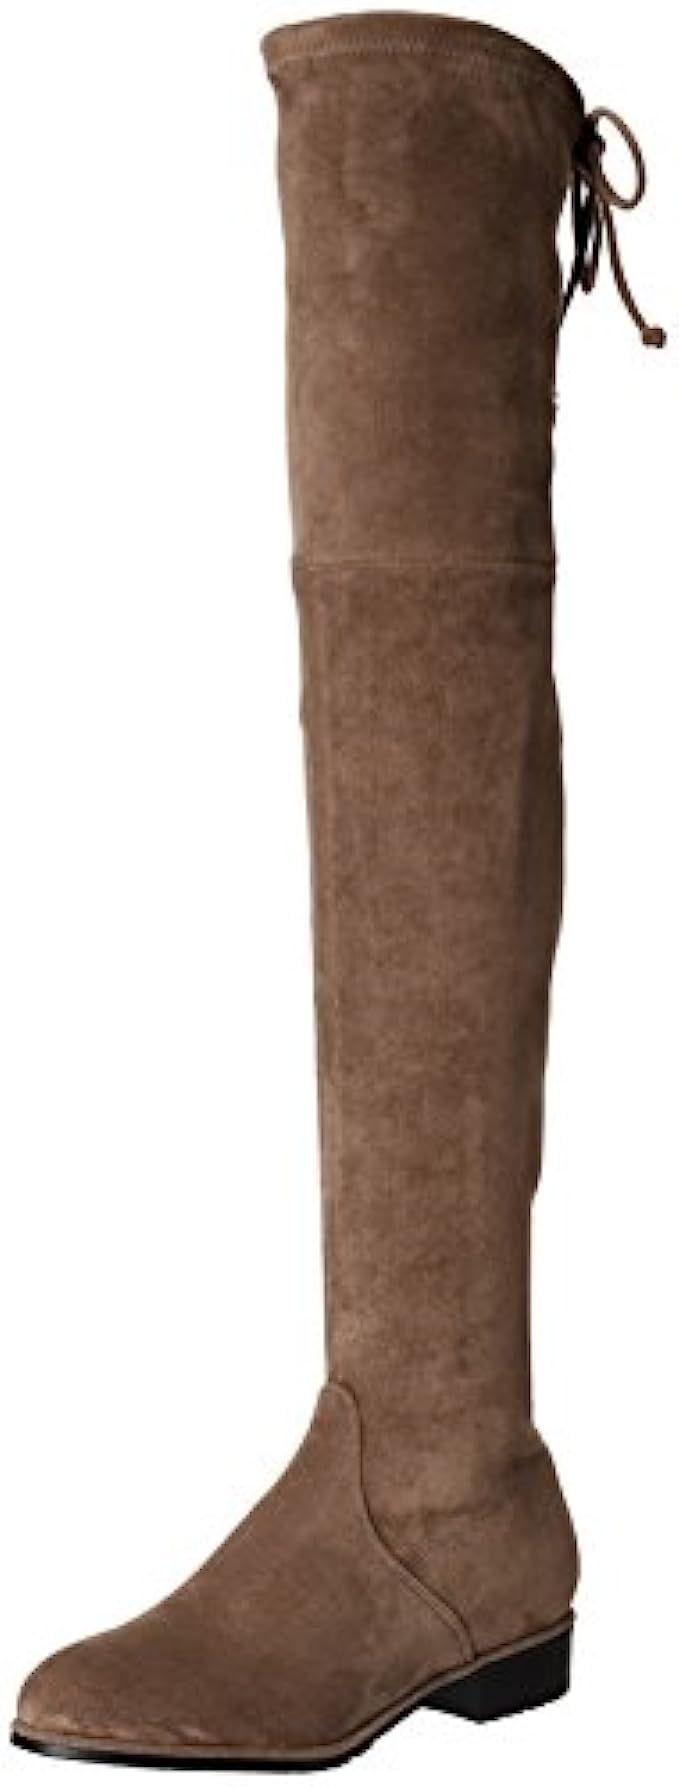 Kaitlyn Pan Women's Microsuede Flat Heel Over The Knee Thigh High Boots | Amazon (US)